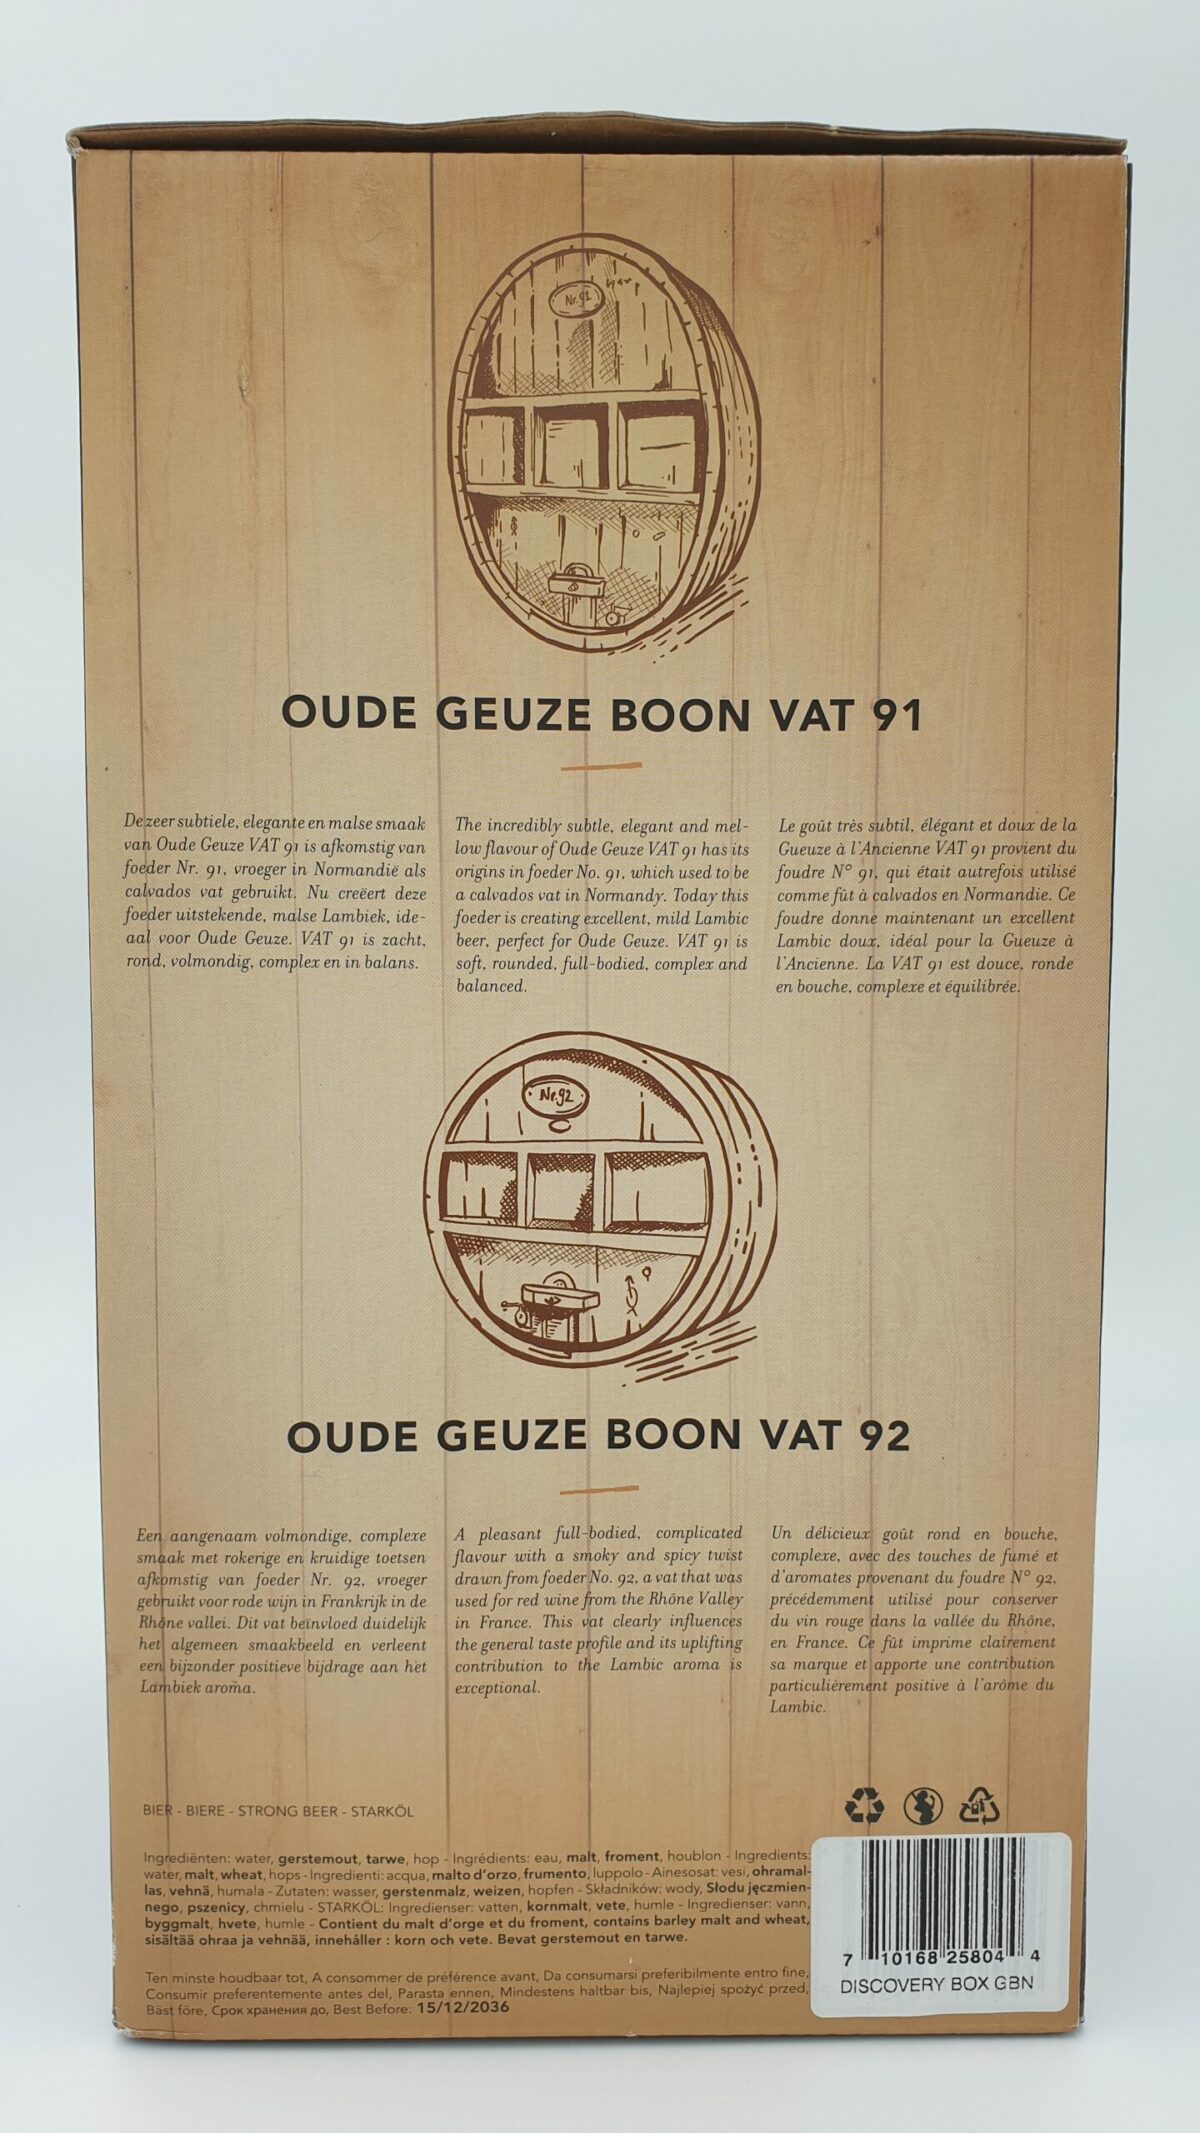 boon oude geuze vat discovery box